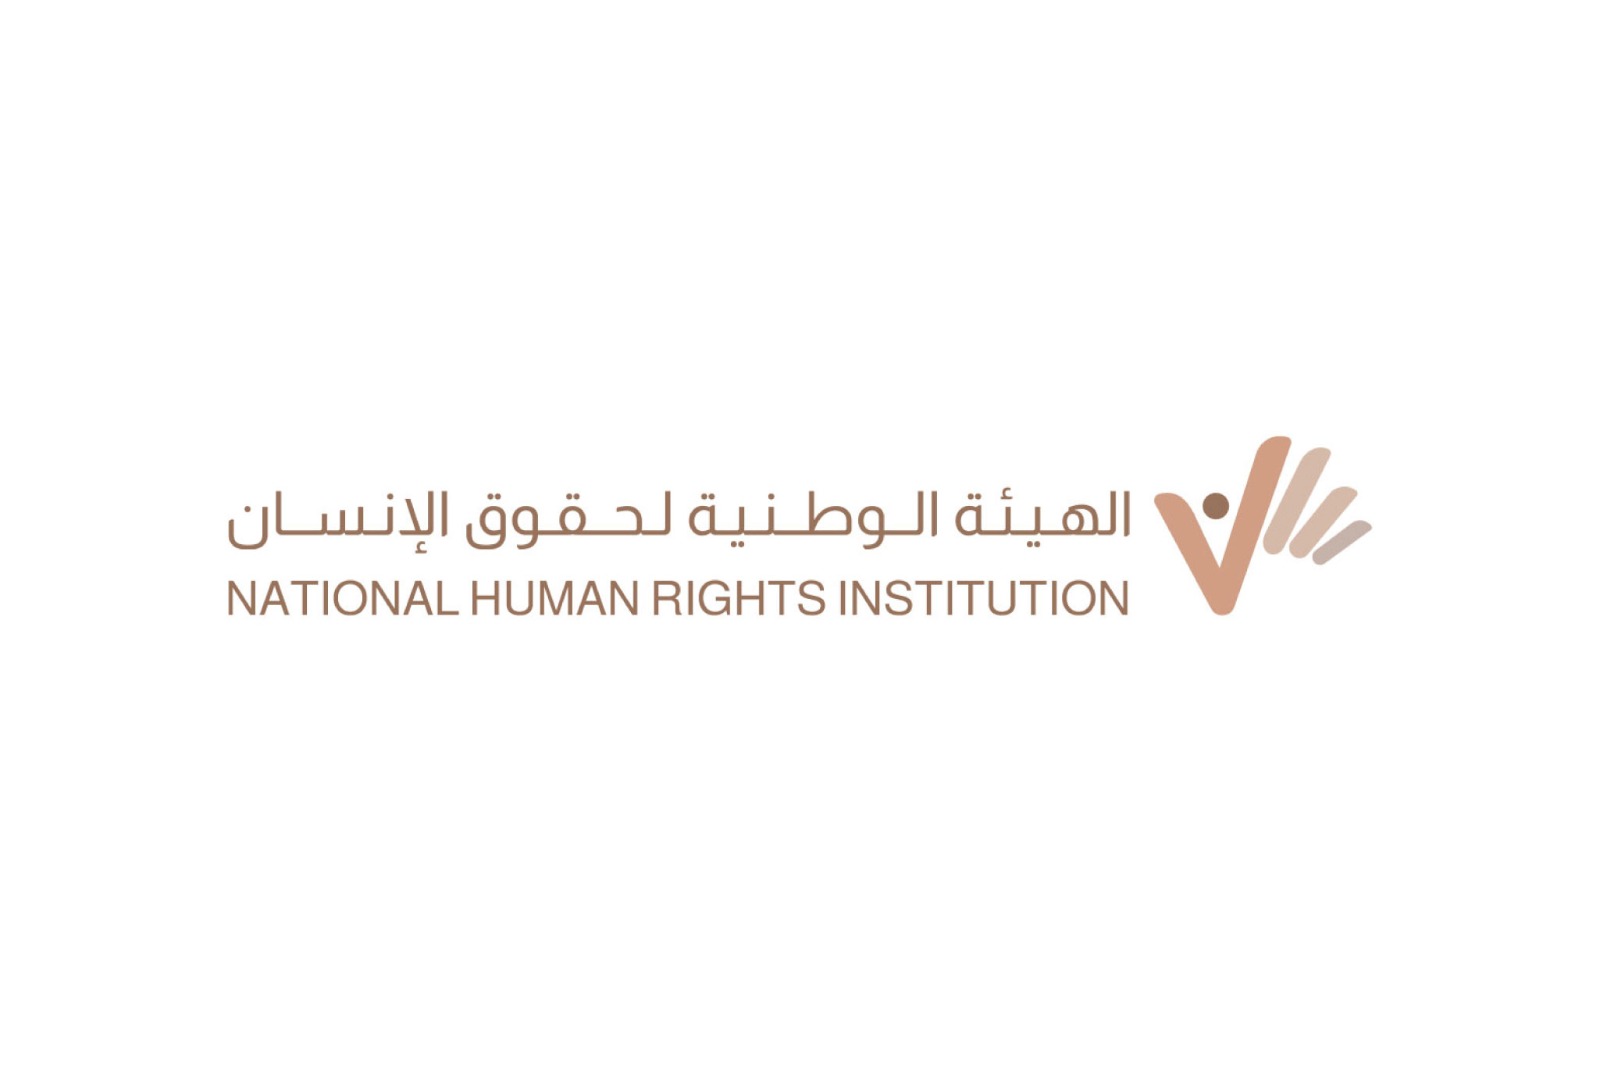 The NHRI participates in a seminar on respecting the rights of individuals with autism